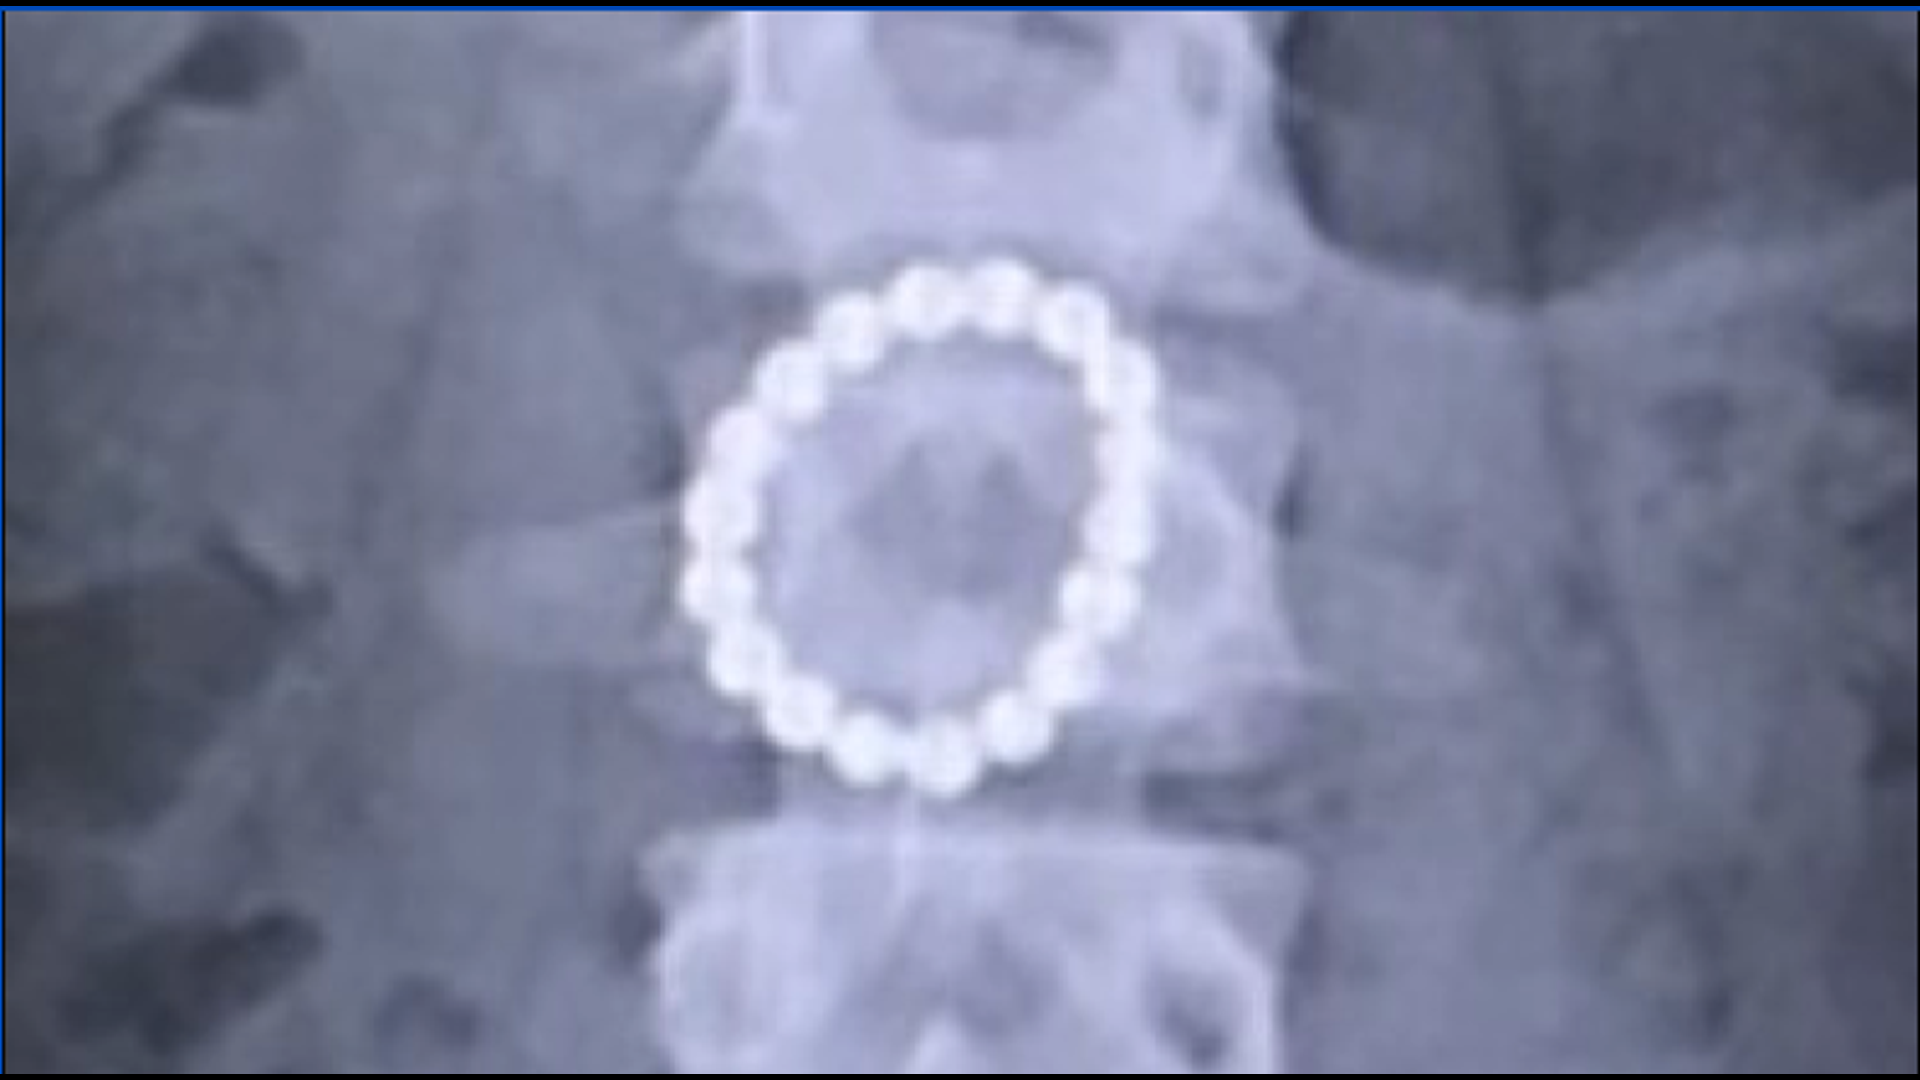 Doctors warn that children are swallowing high-powered rare earth magnet balls marketed as desk toys for adults – sending thousands of kids to the hospital.